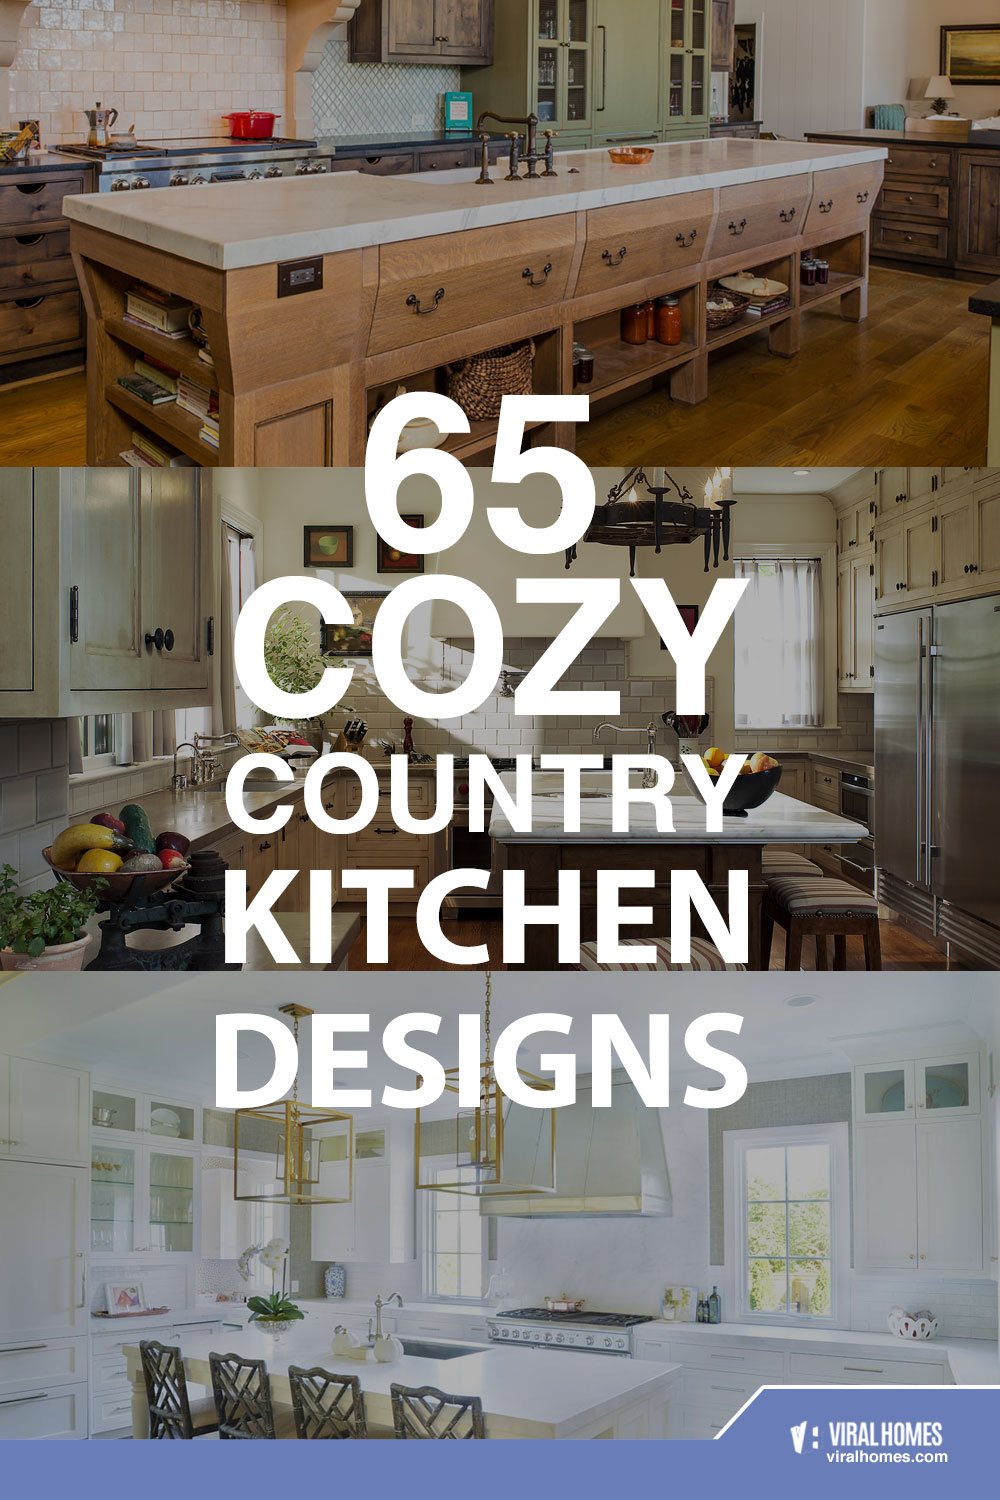 Cozy Country Kitchen Designs for the Home Cooks